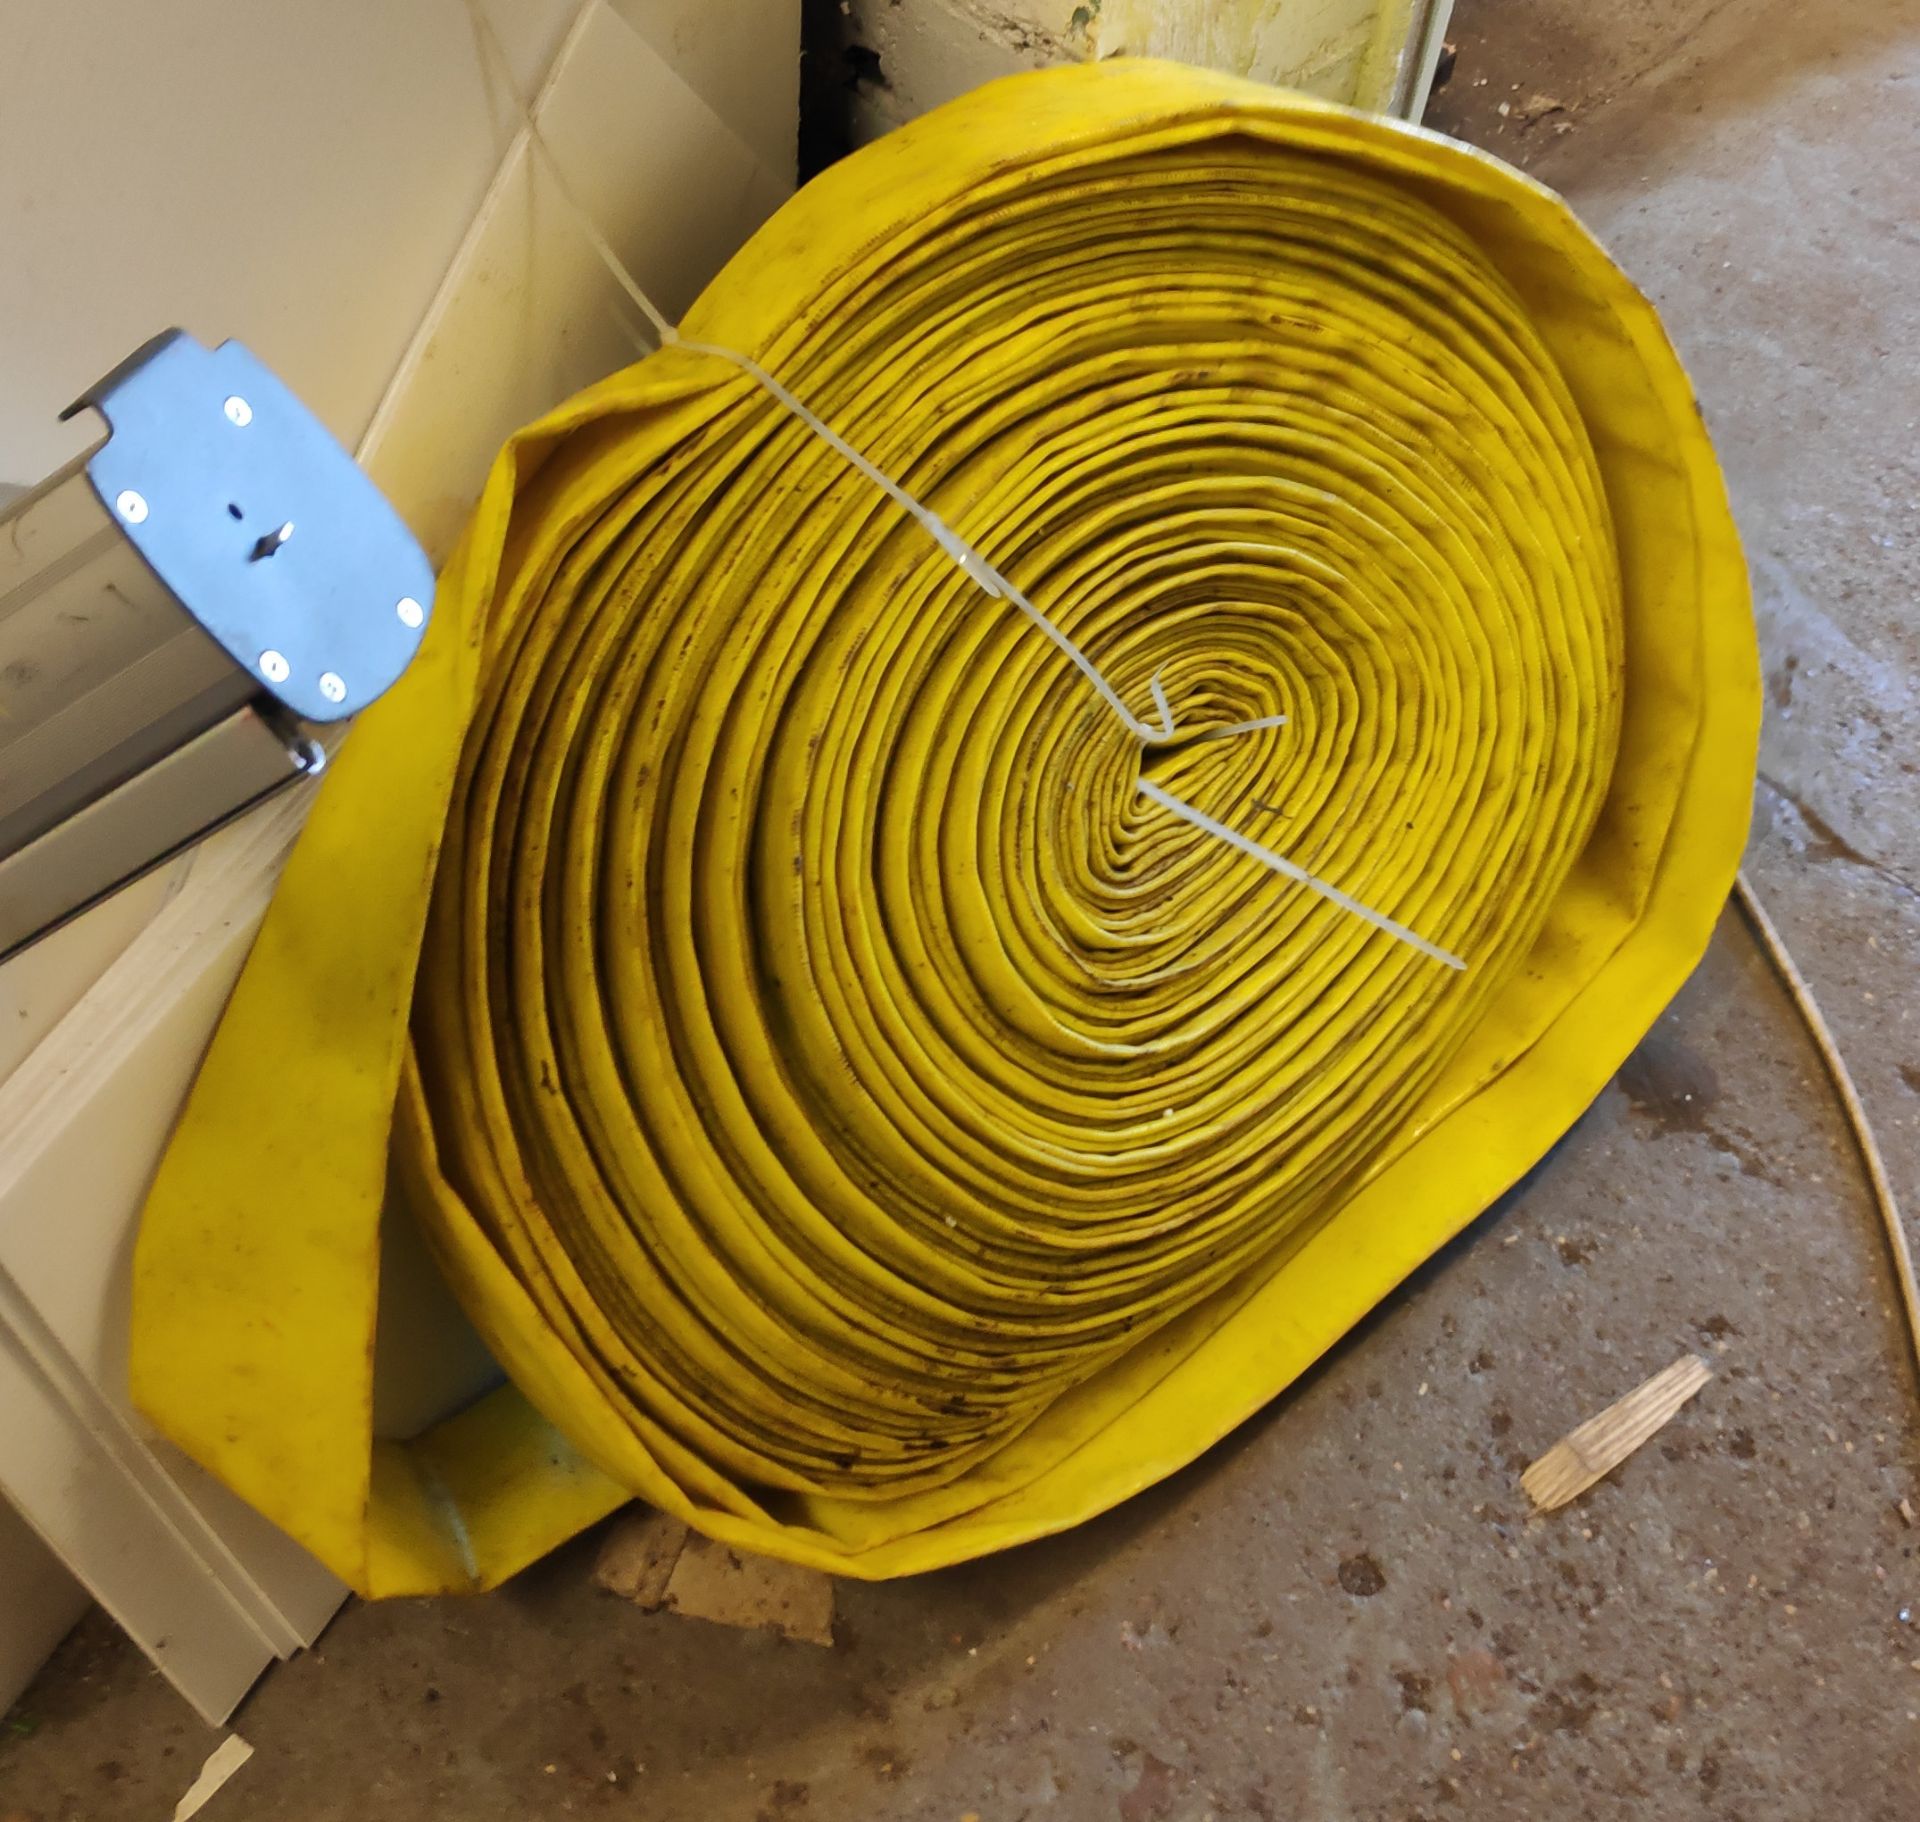 3 Rolls of Yellow 2 Inch High Pressure Hose - CL682 - Location: Bedford NN29